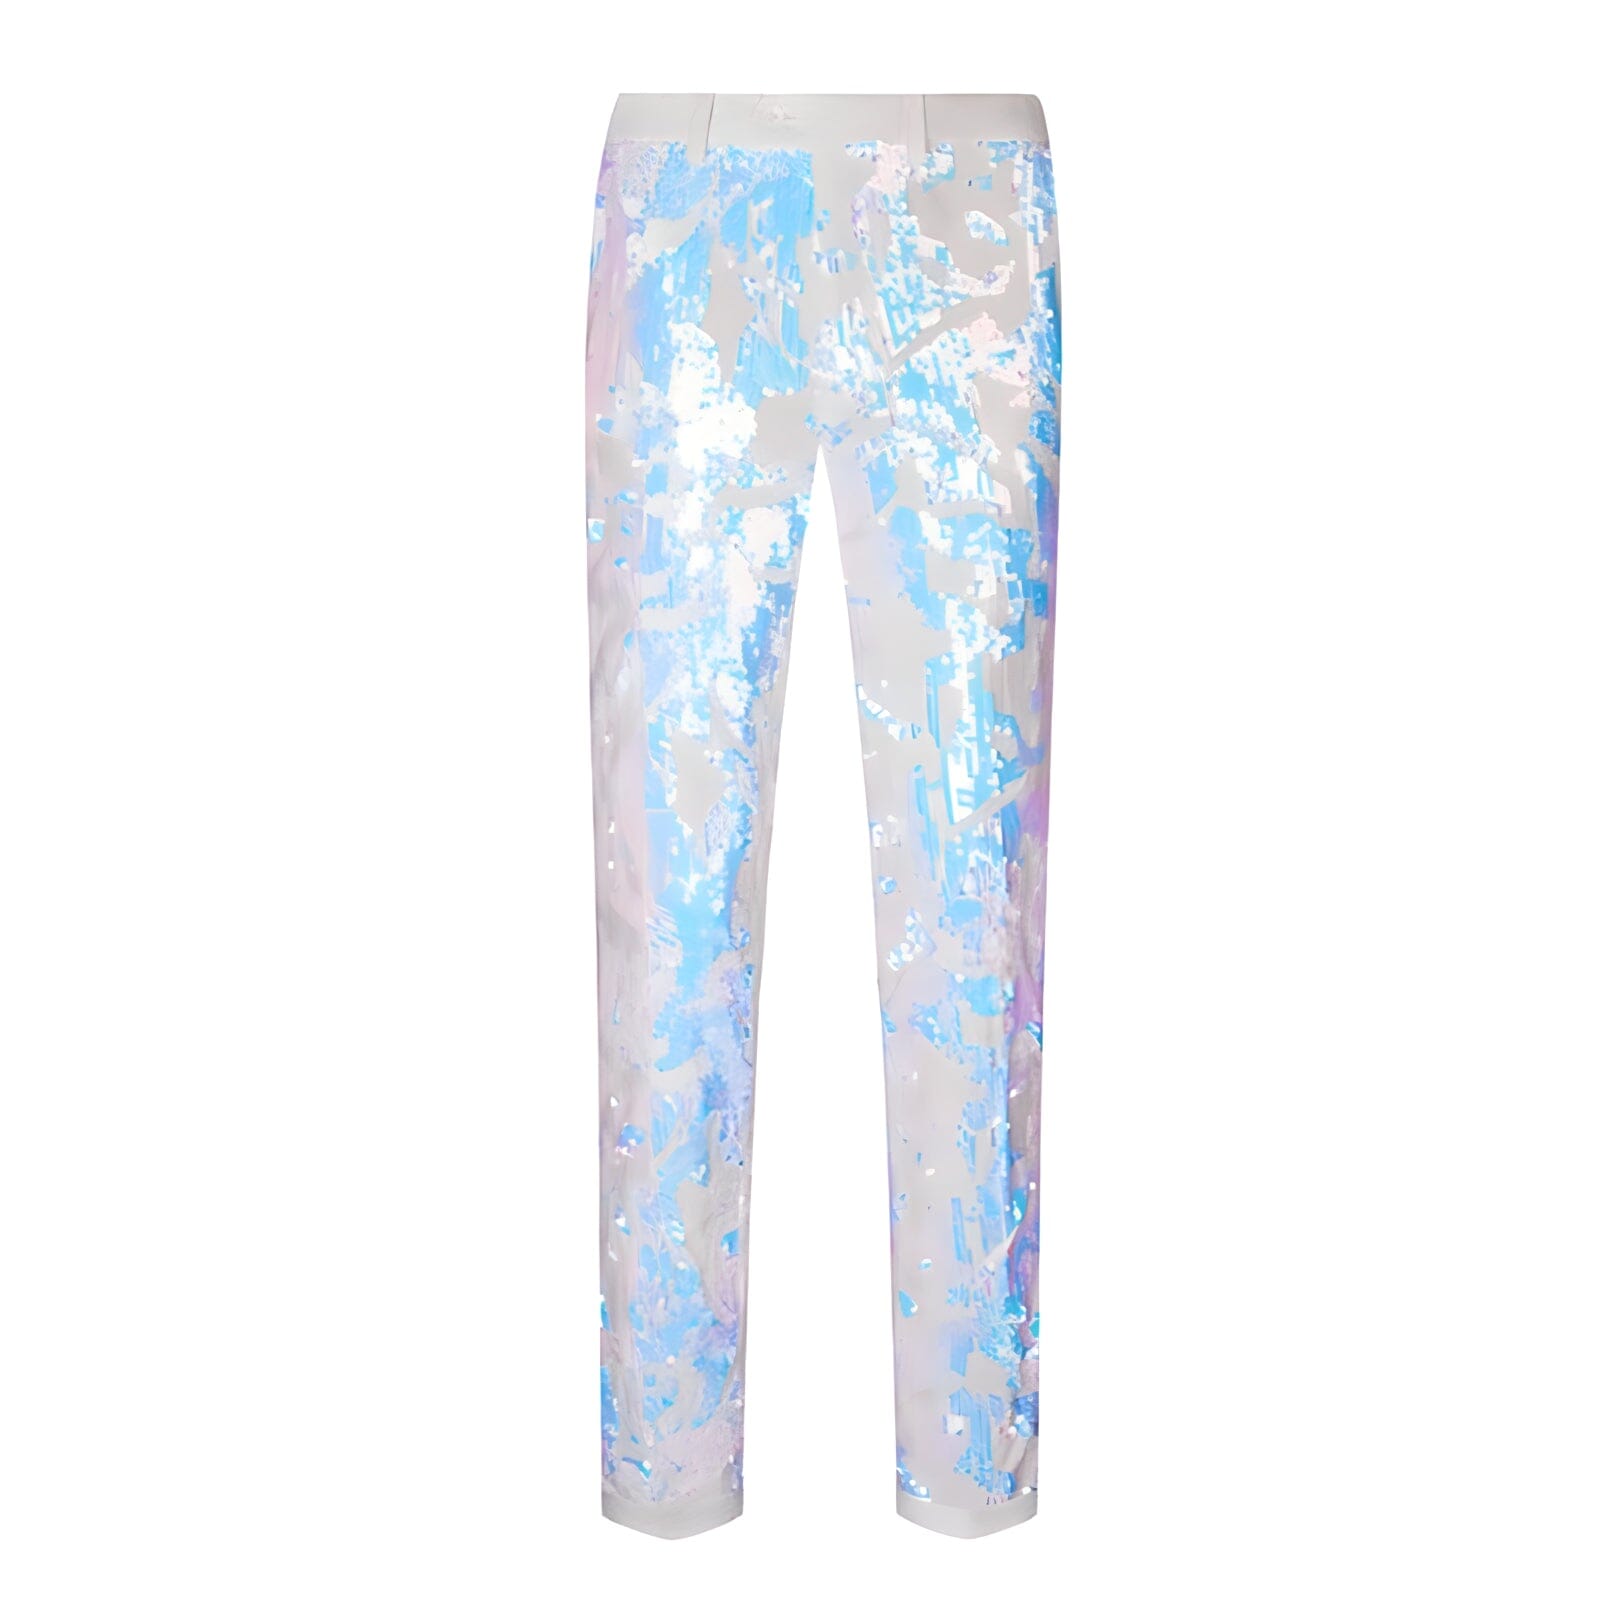 The Angelo Sequin Slim Fit Dress Suit Pants Trousers - Multiple Colors WD Styles White XS 